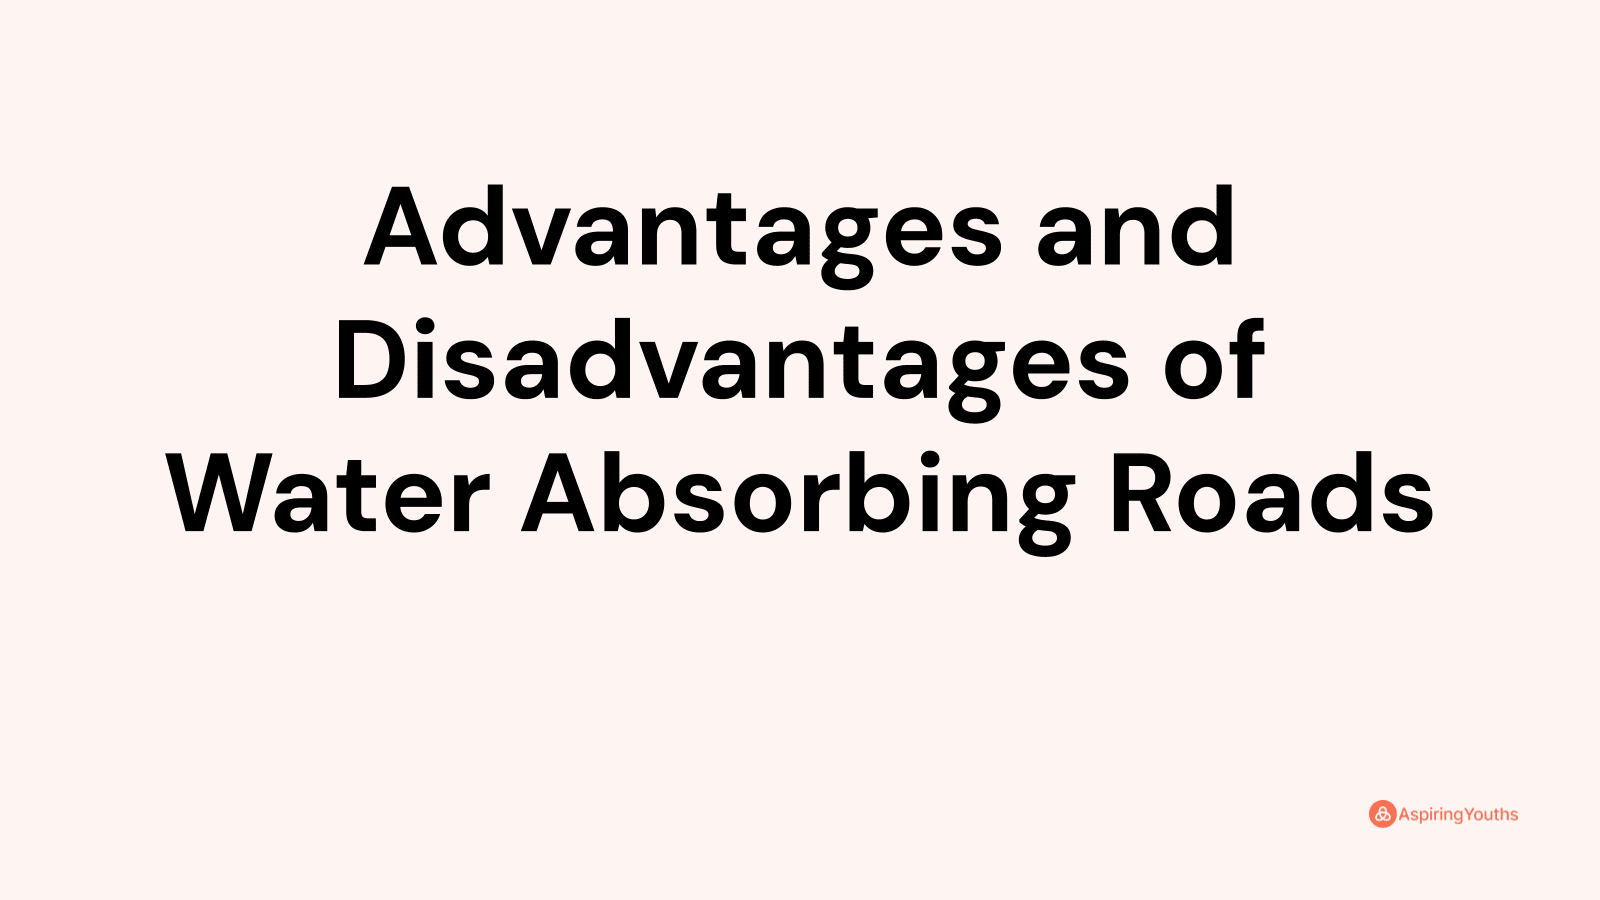 research paper on water absorbing roads